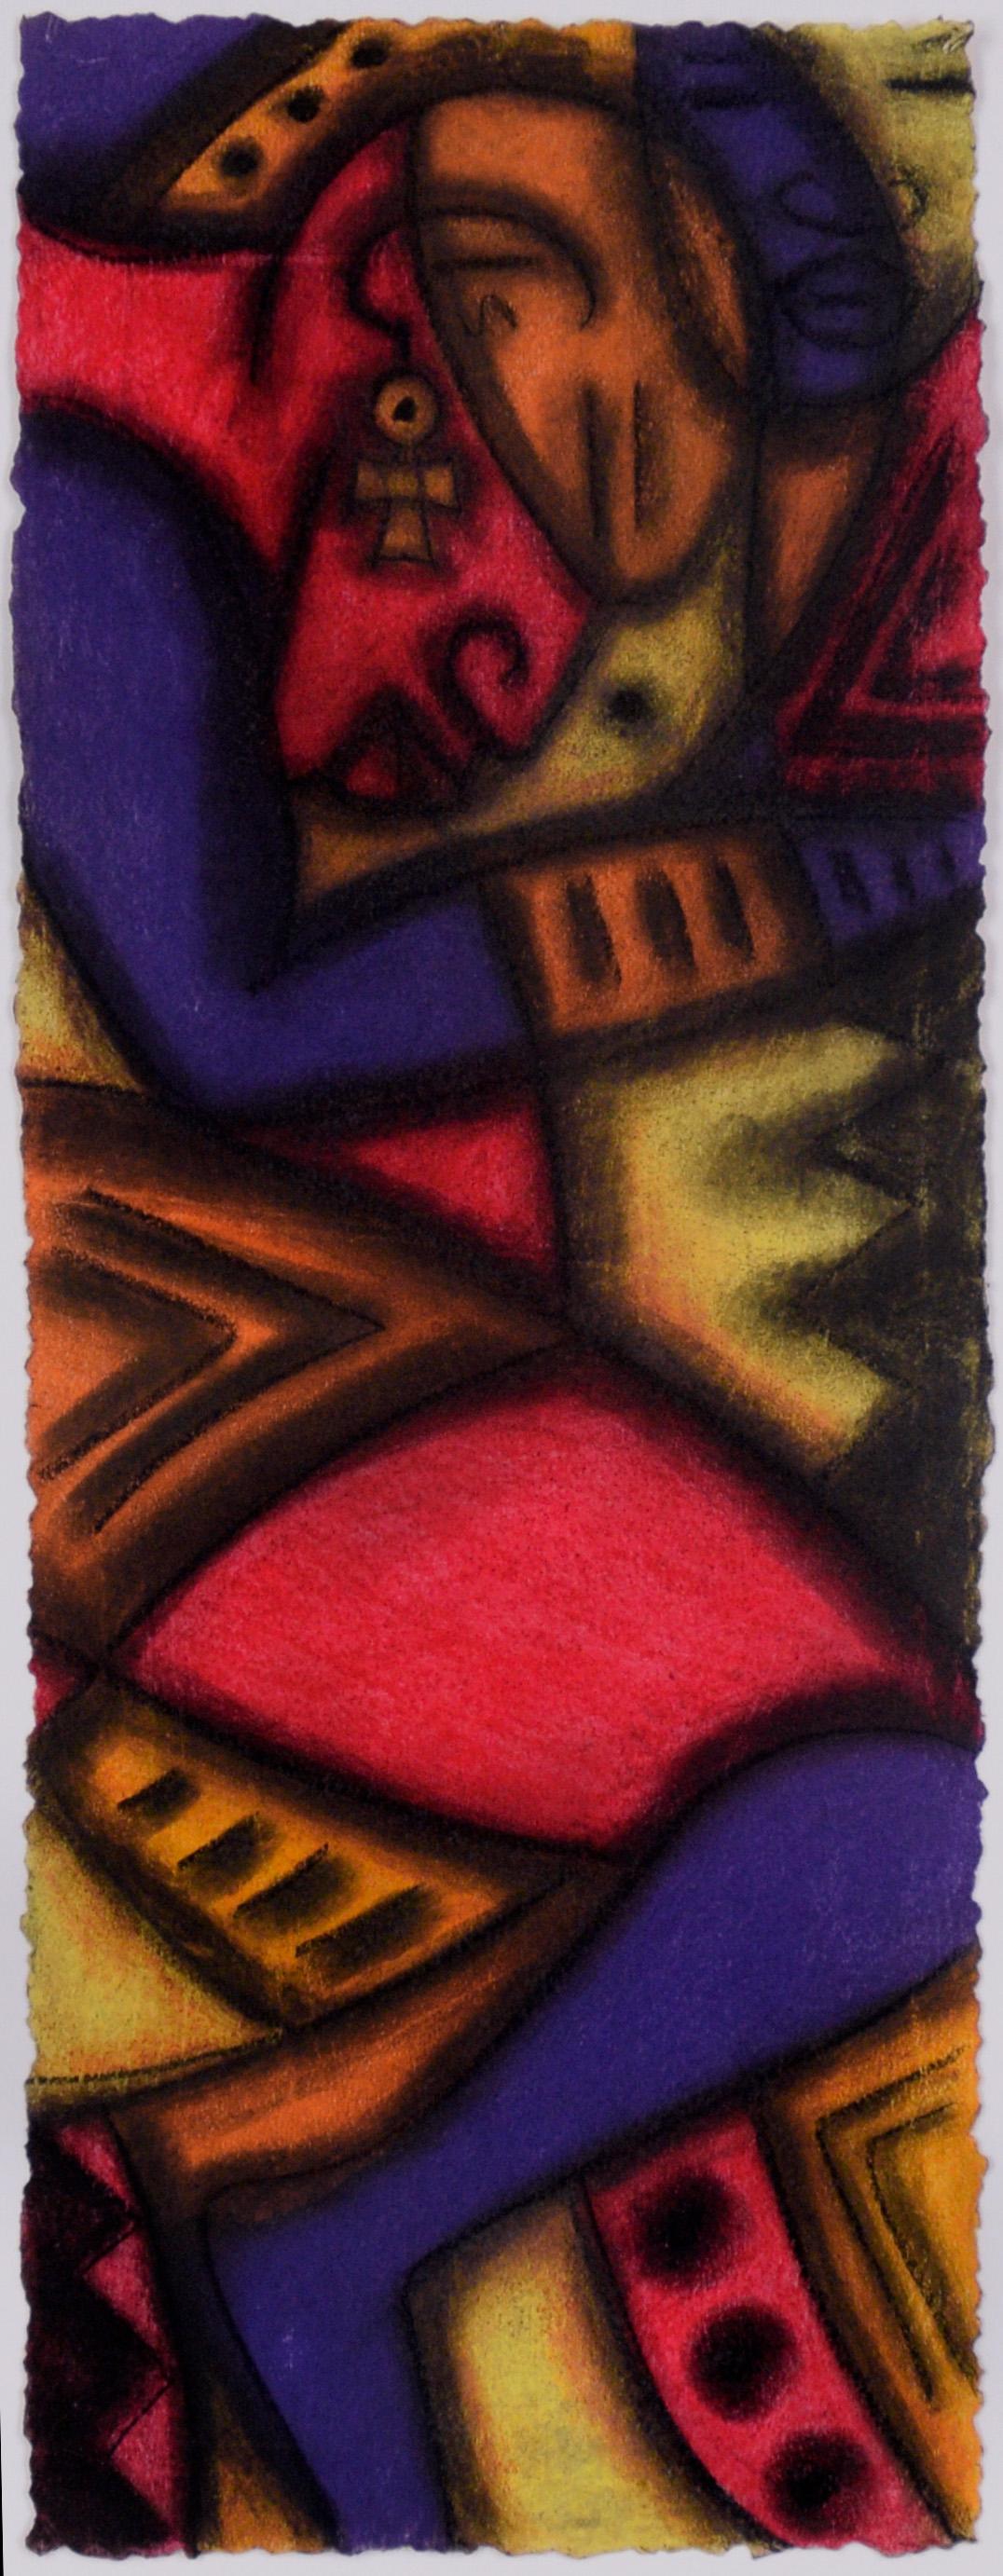 Abstracted Sleeping Female Figurative in Pastel on Paper

Vivid abstracted sleeping female figurative by Black Arts Bay Area artist, Kelvin Curry (American, 20th Century), circa 2000. A woman's sleeping on her side is shown in bold and playful